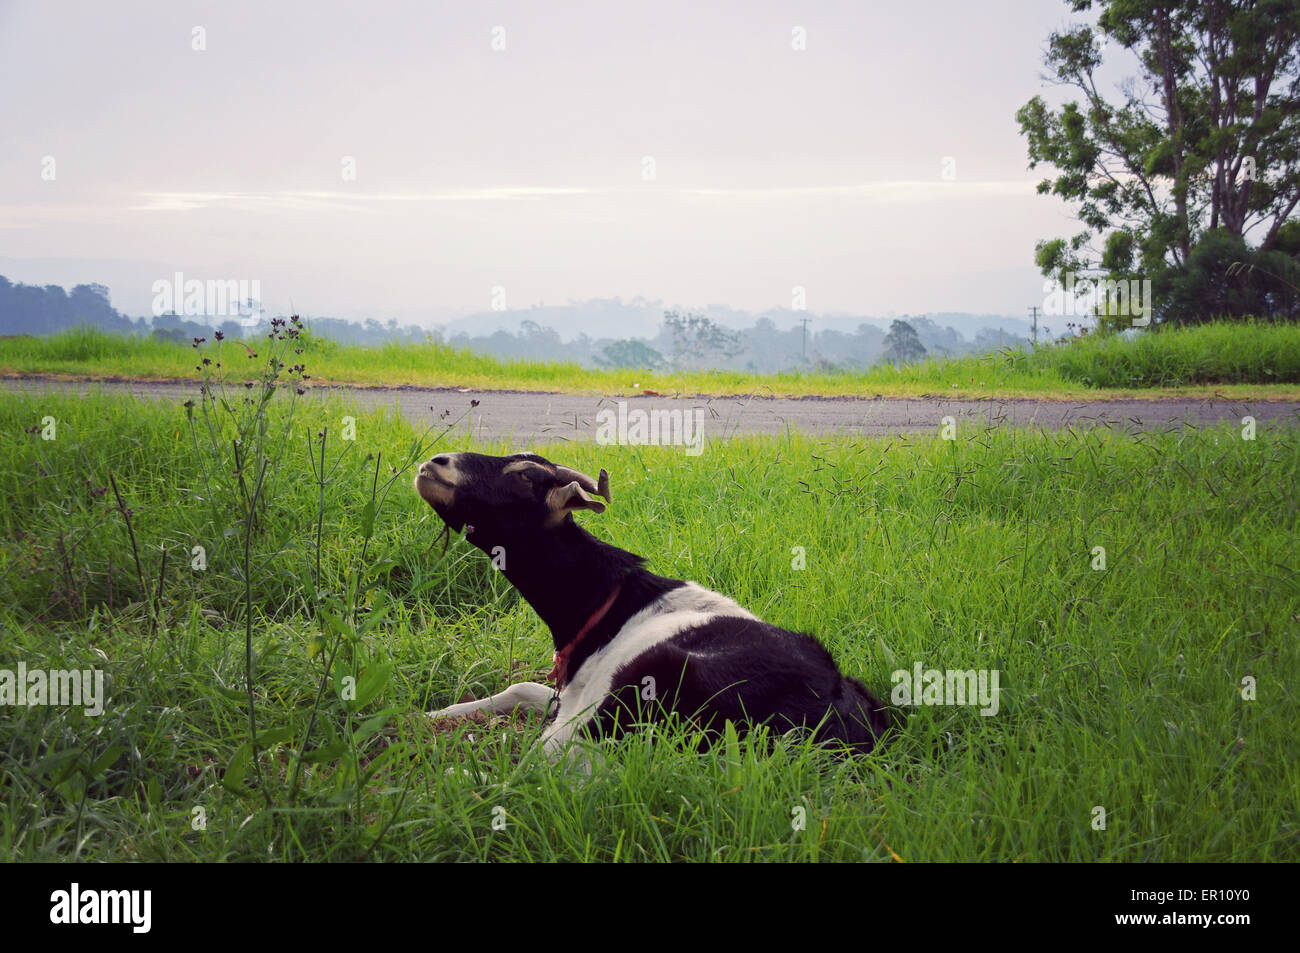 Goat relaxing on the green grass Stock Photo